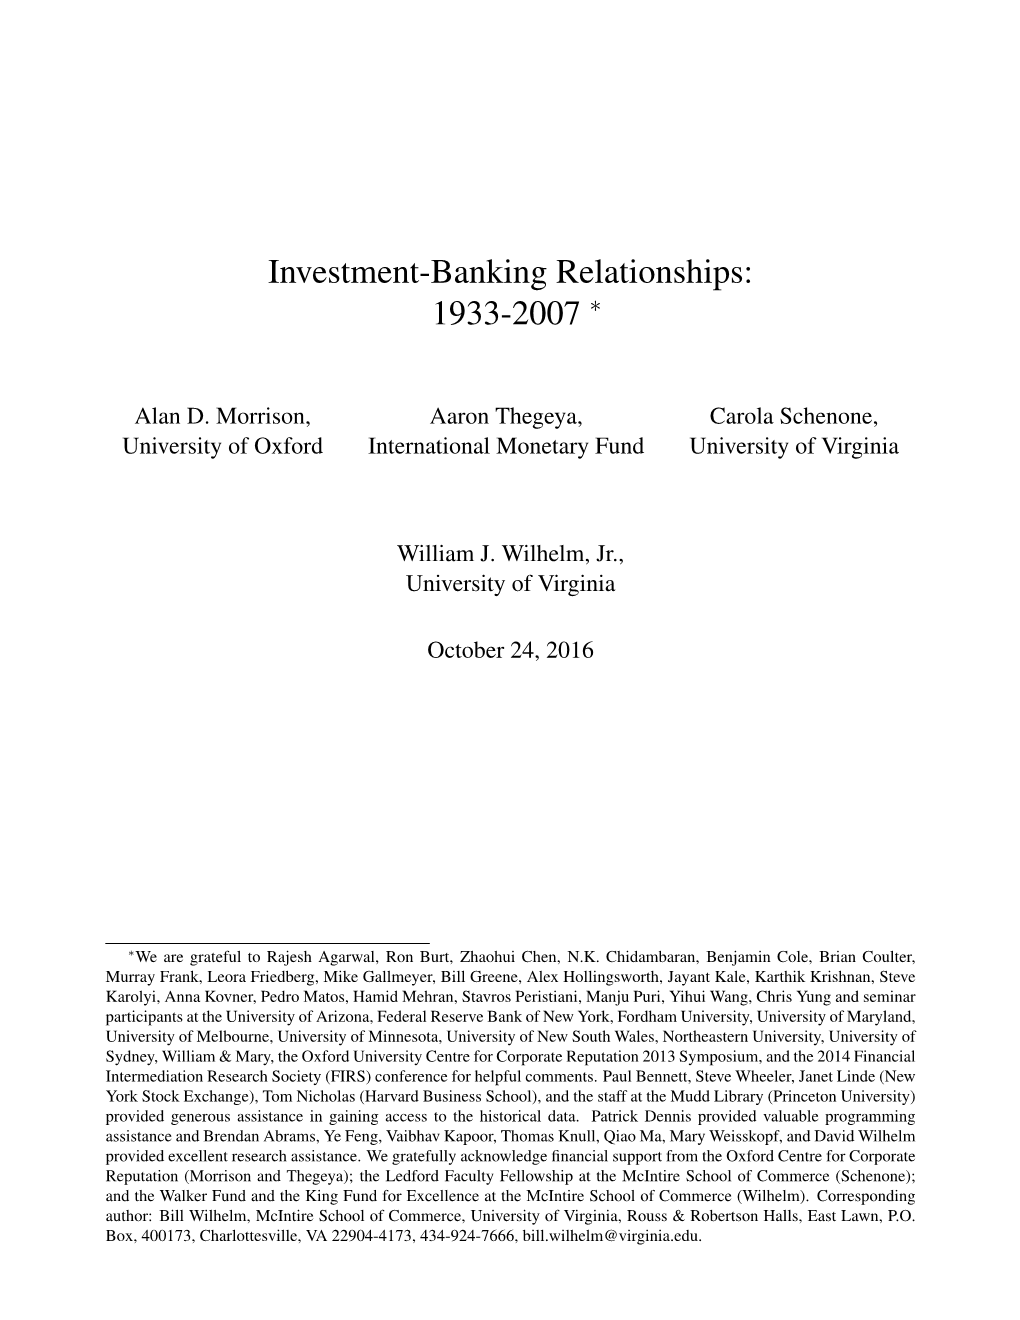 Investment-Banking Relationships: 1933-2007 ∗